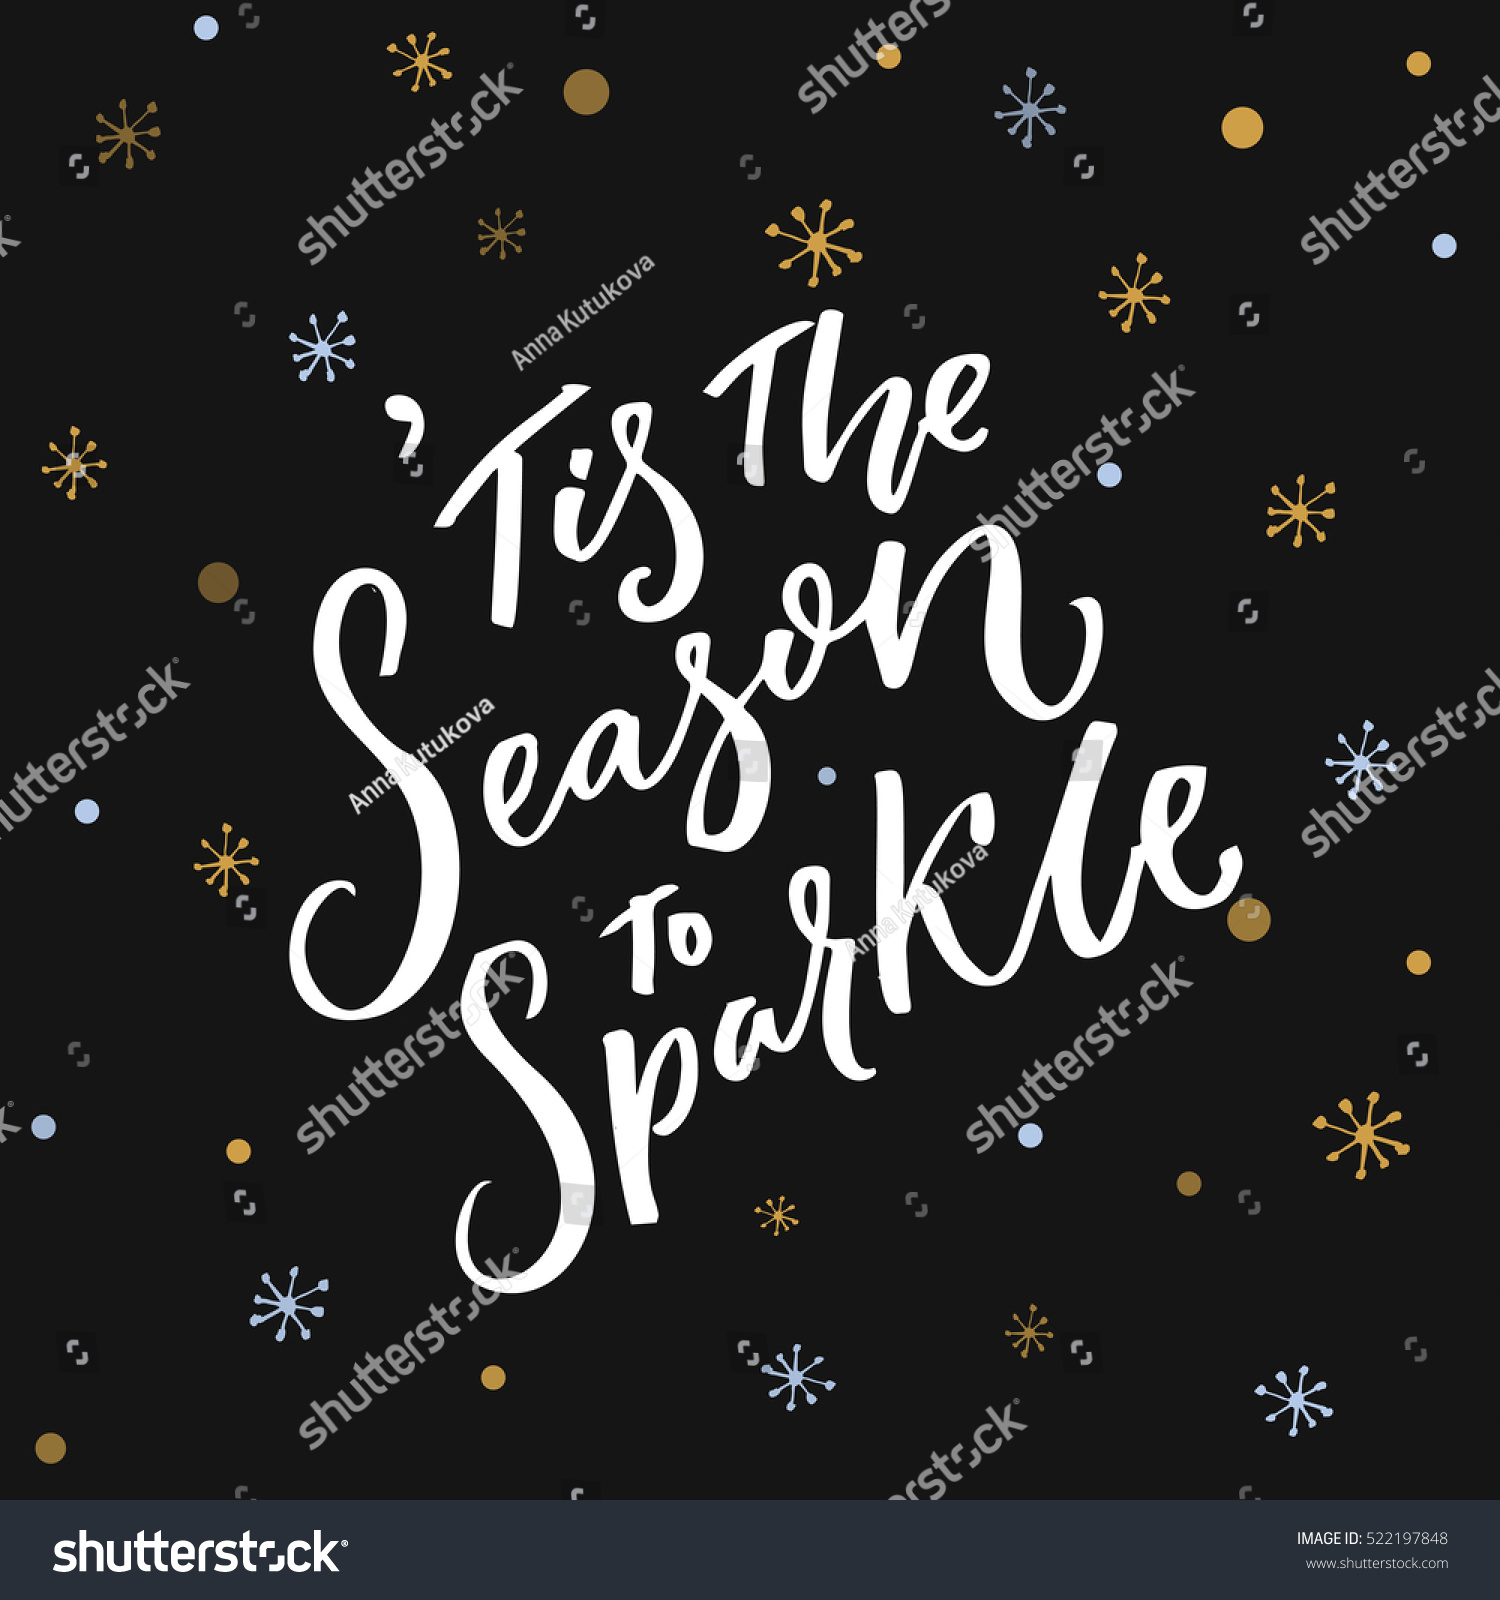 Tis Season Sparkle Inspirational Quote About Stock Vector 522197848 - Shutterstock